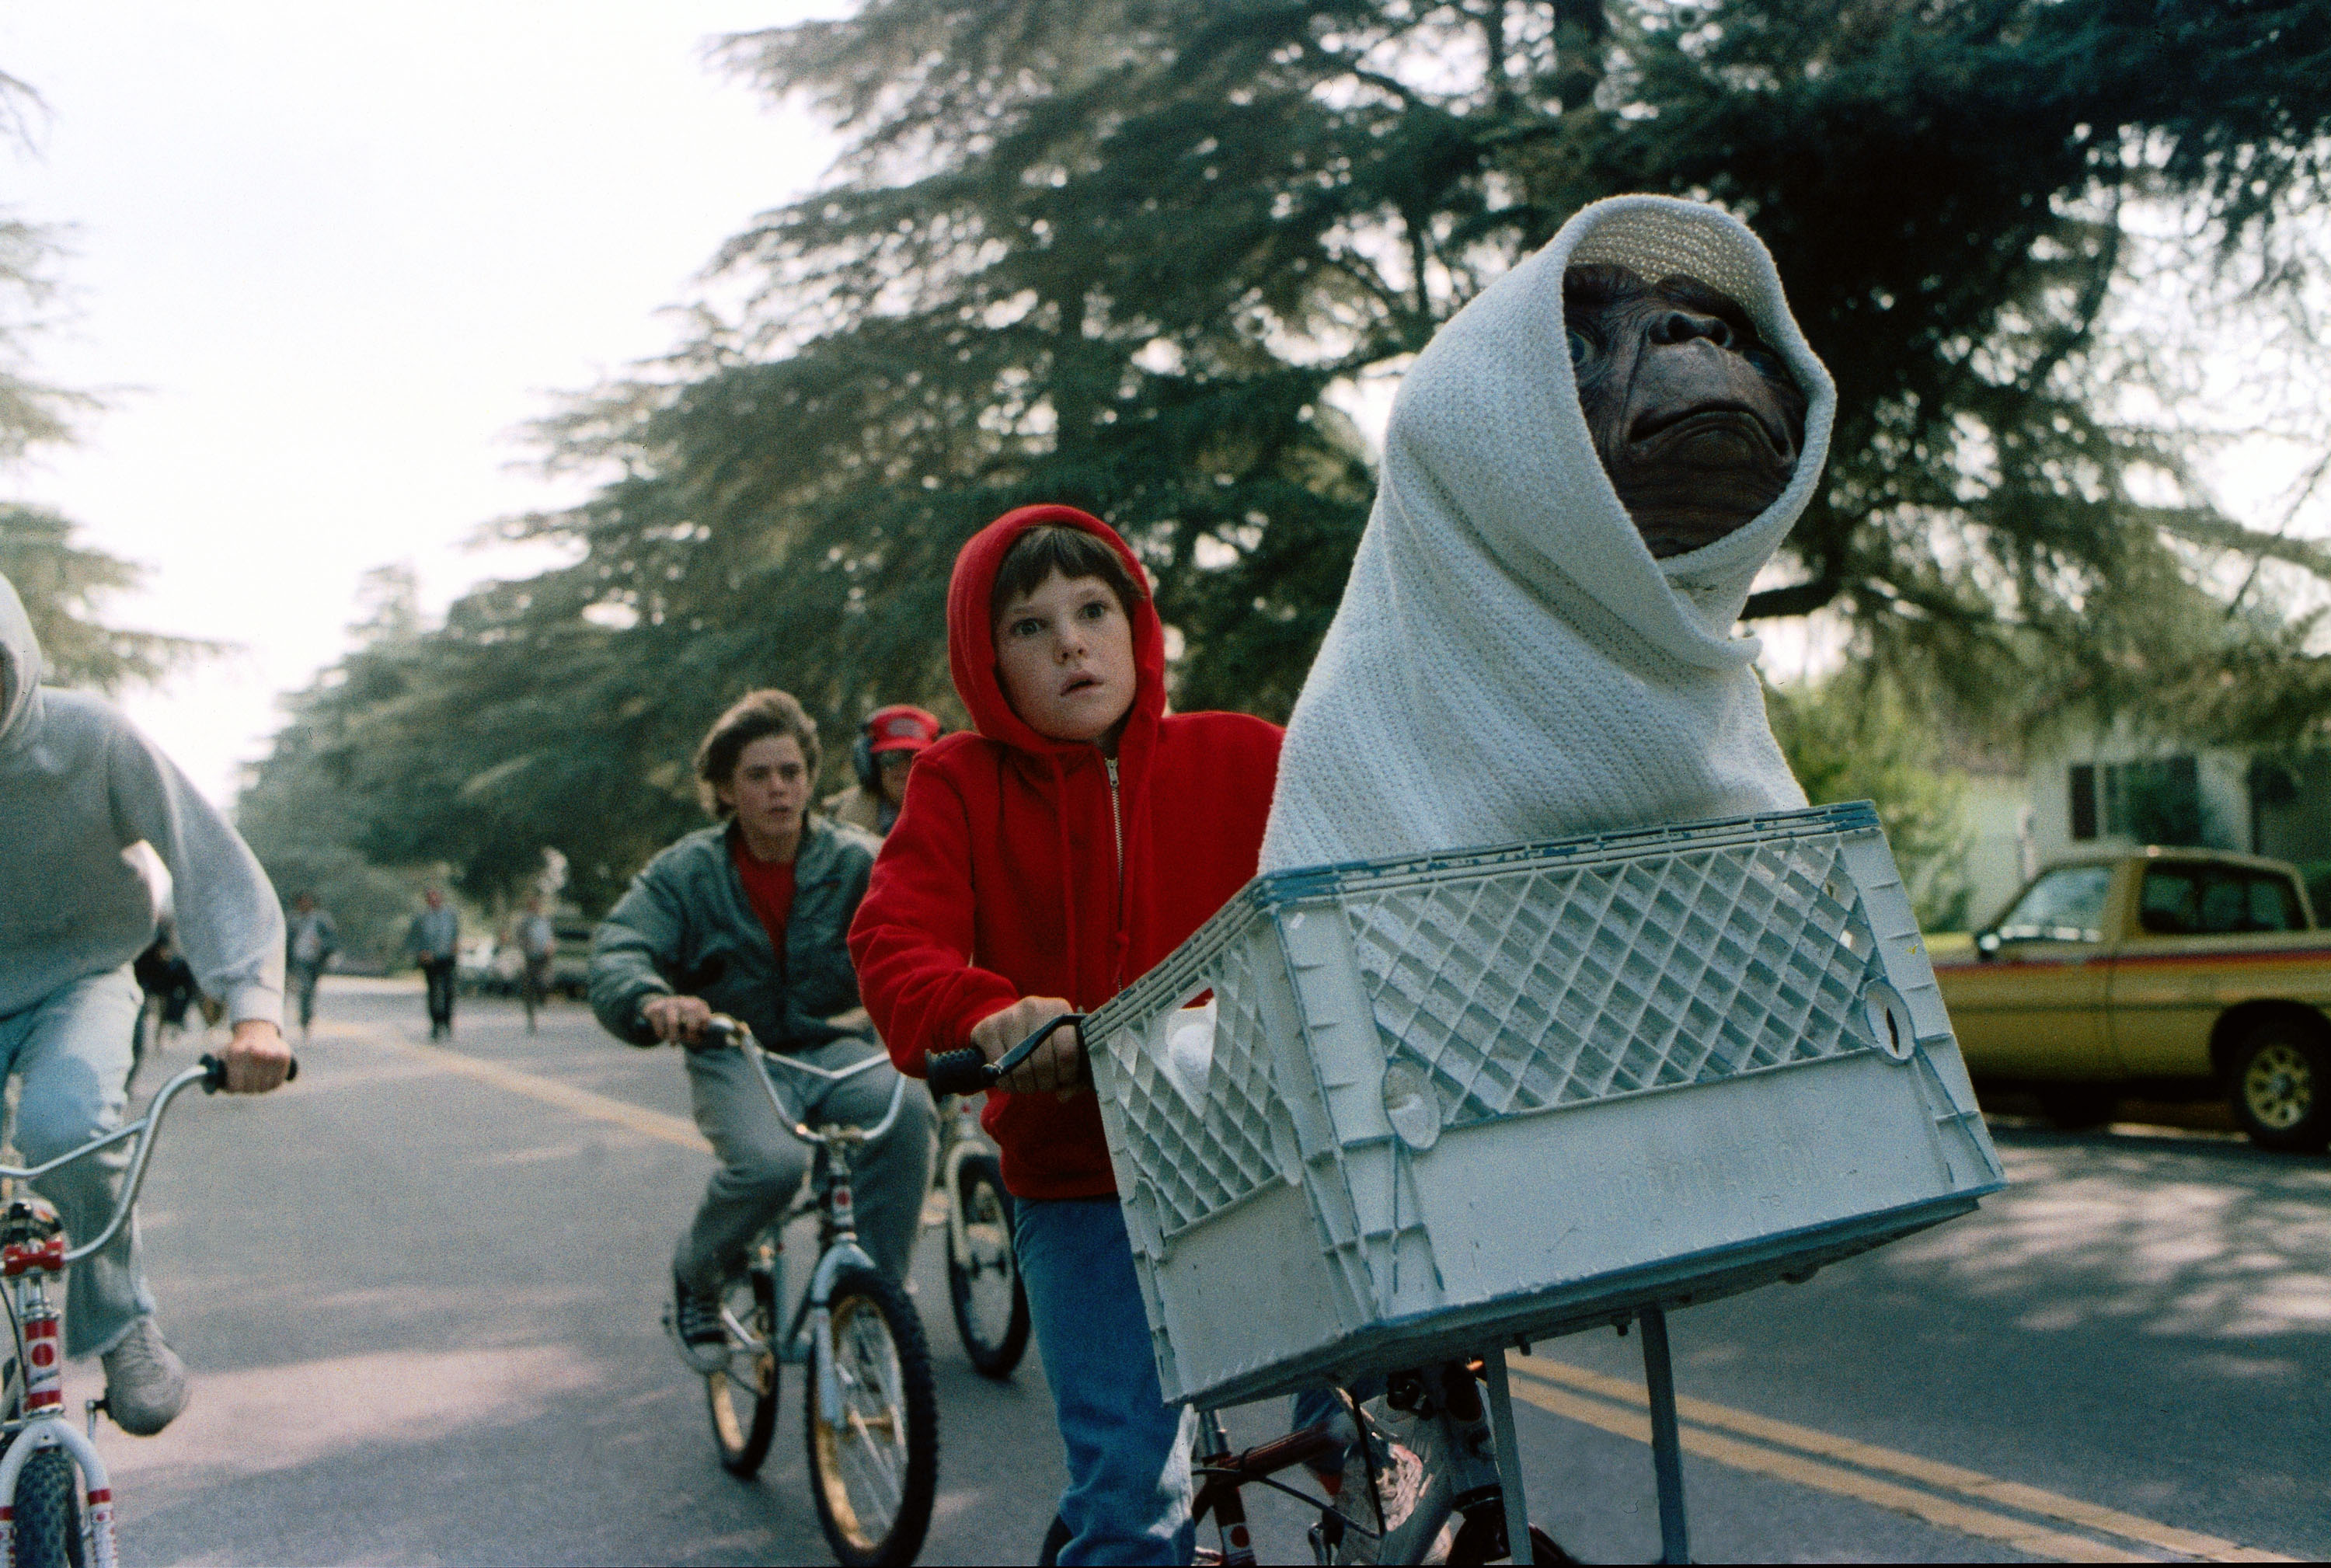 E.T. animatronic model auctioned for $2.56 million, concept for